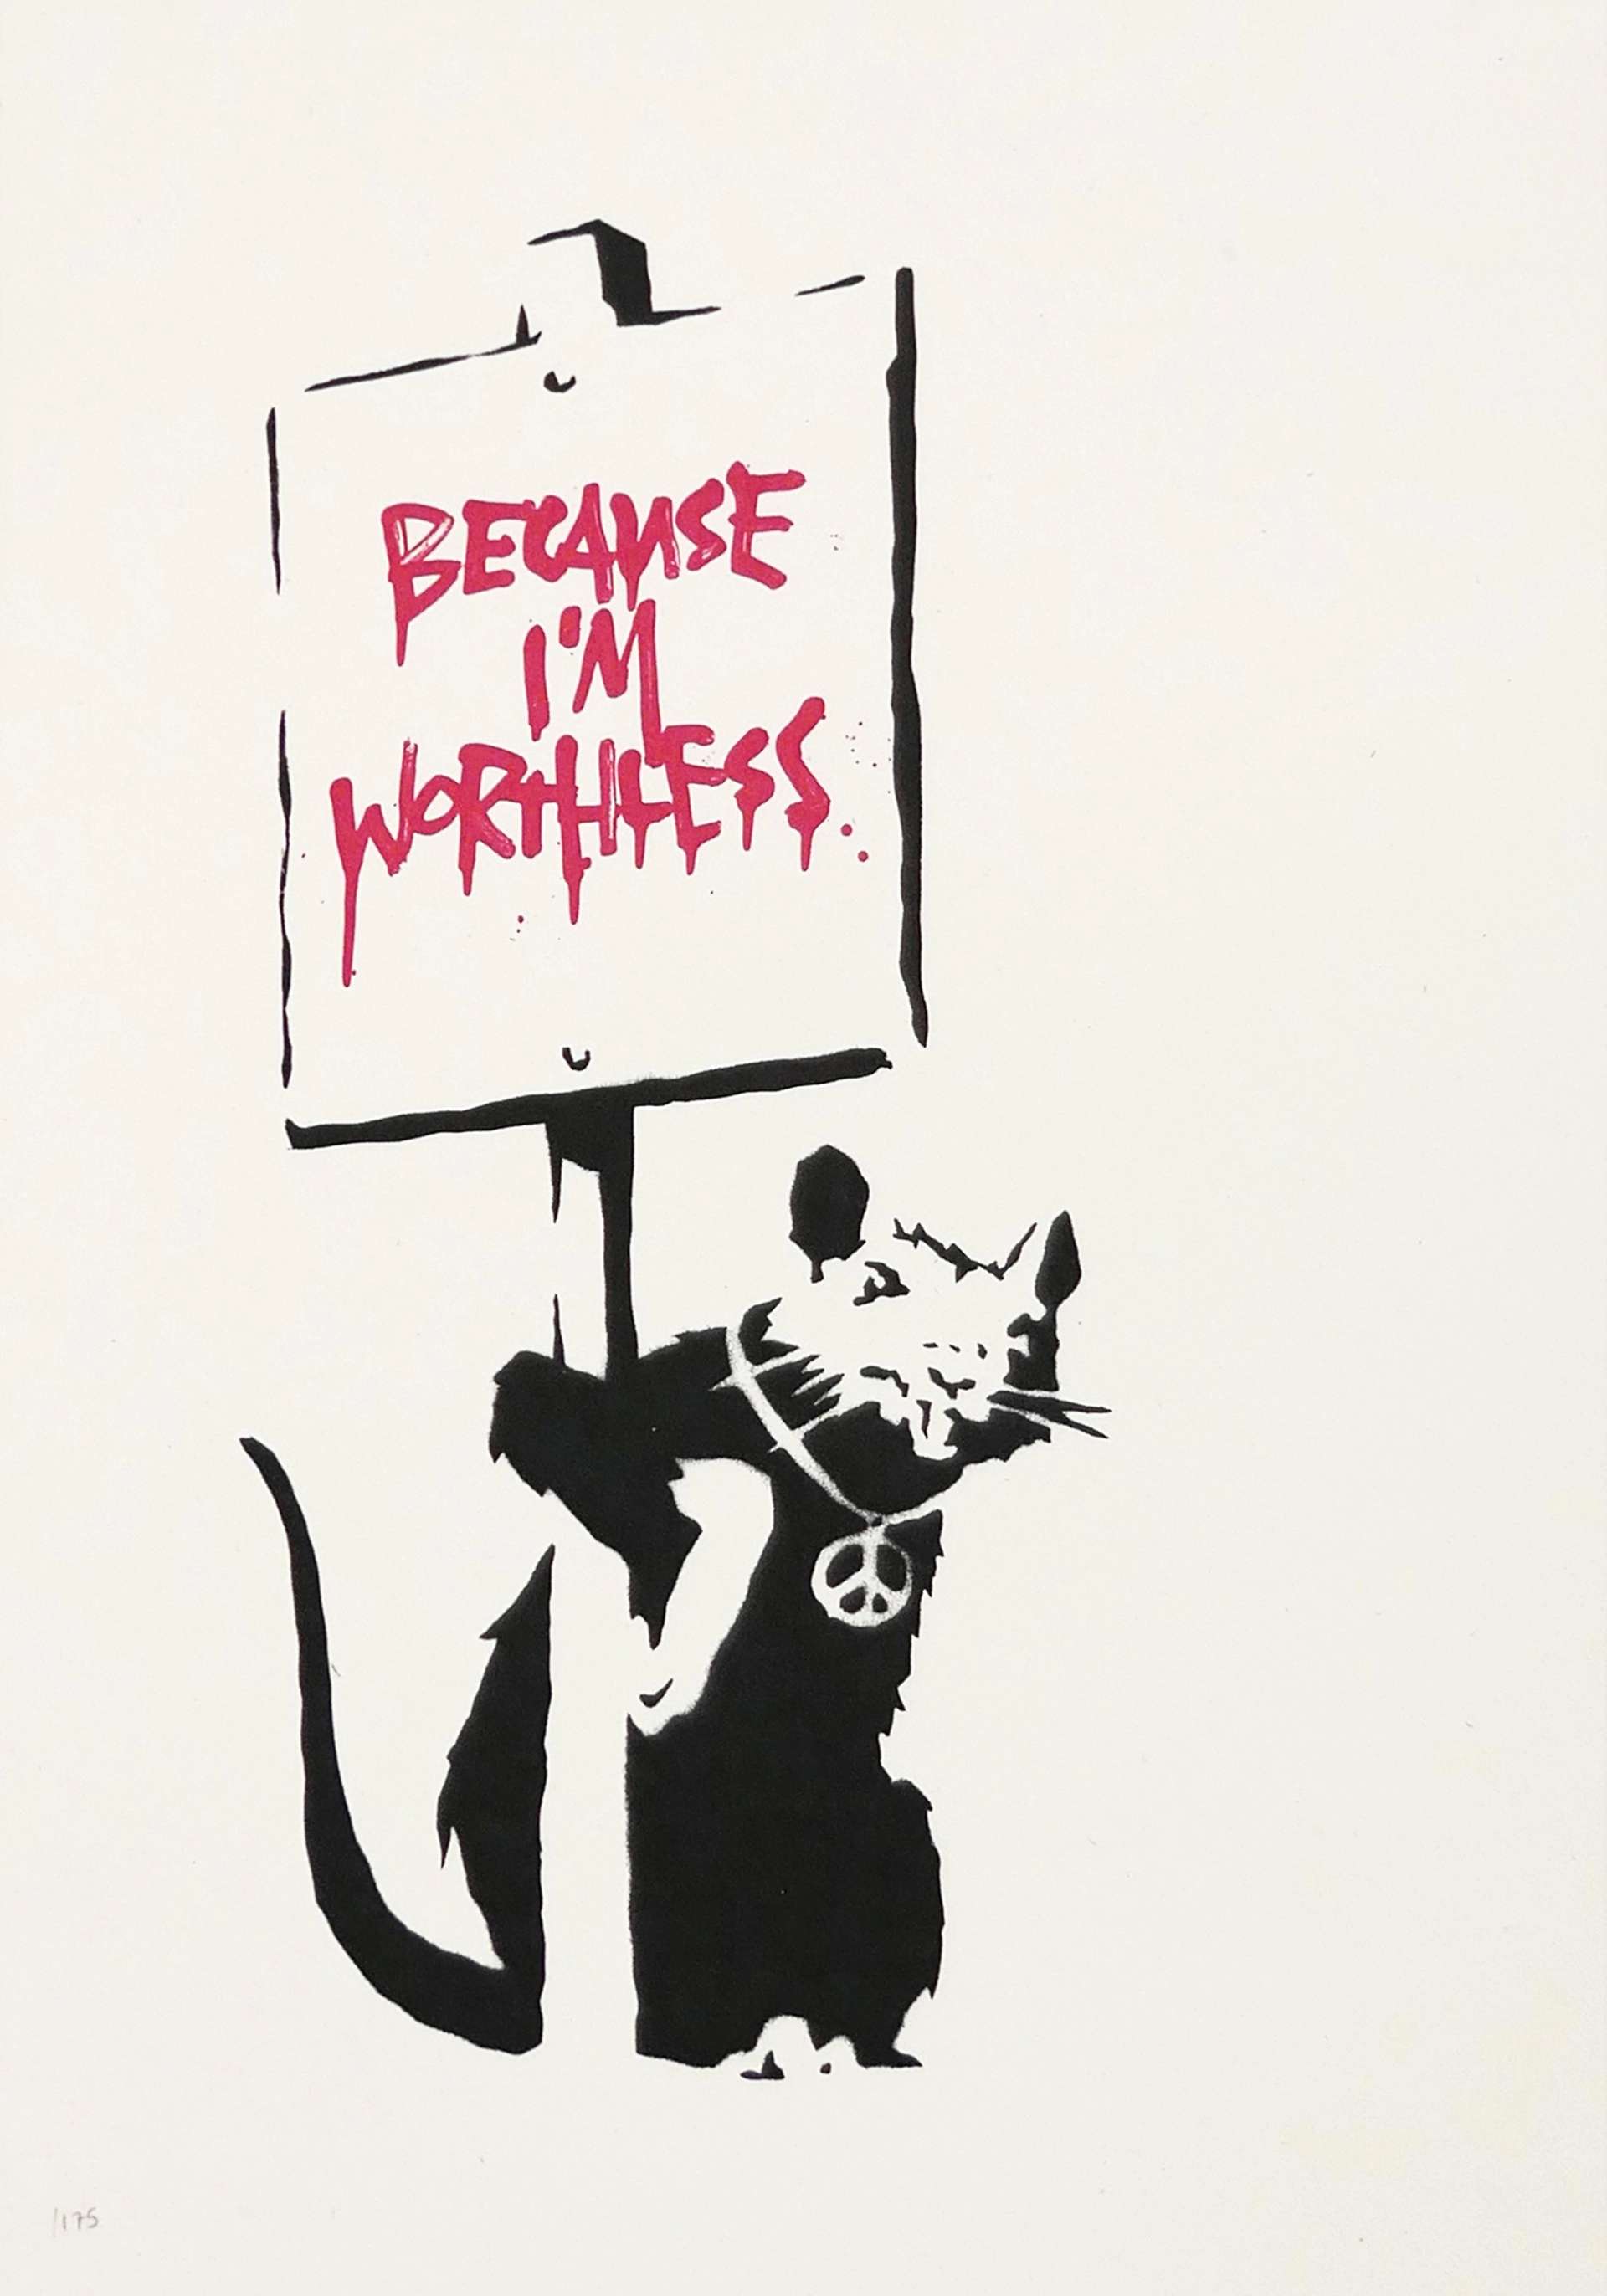 Because I’m Worthless by Banksy